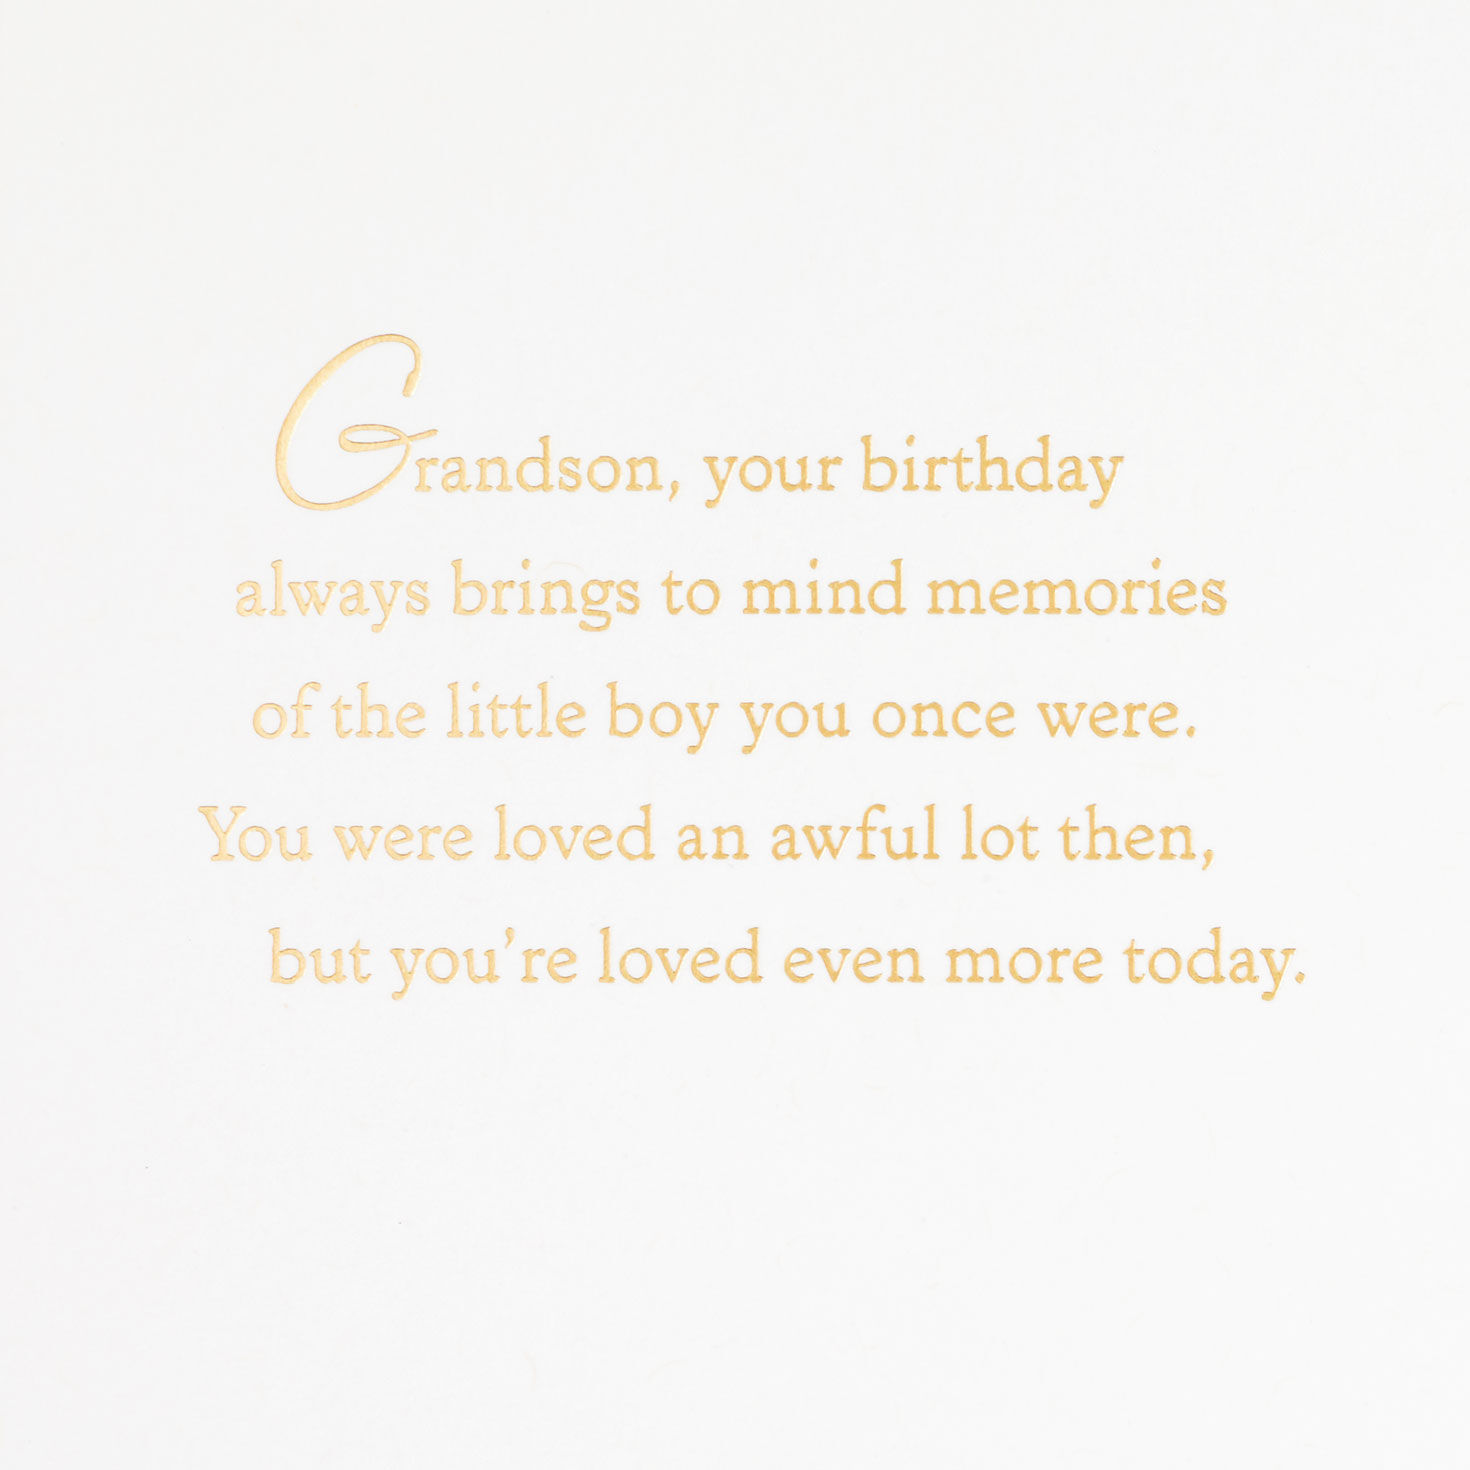 Pride, Joy and Love Birthday Card for Grandson for only USD 4.99 | Hallmark